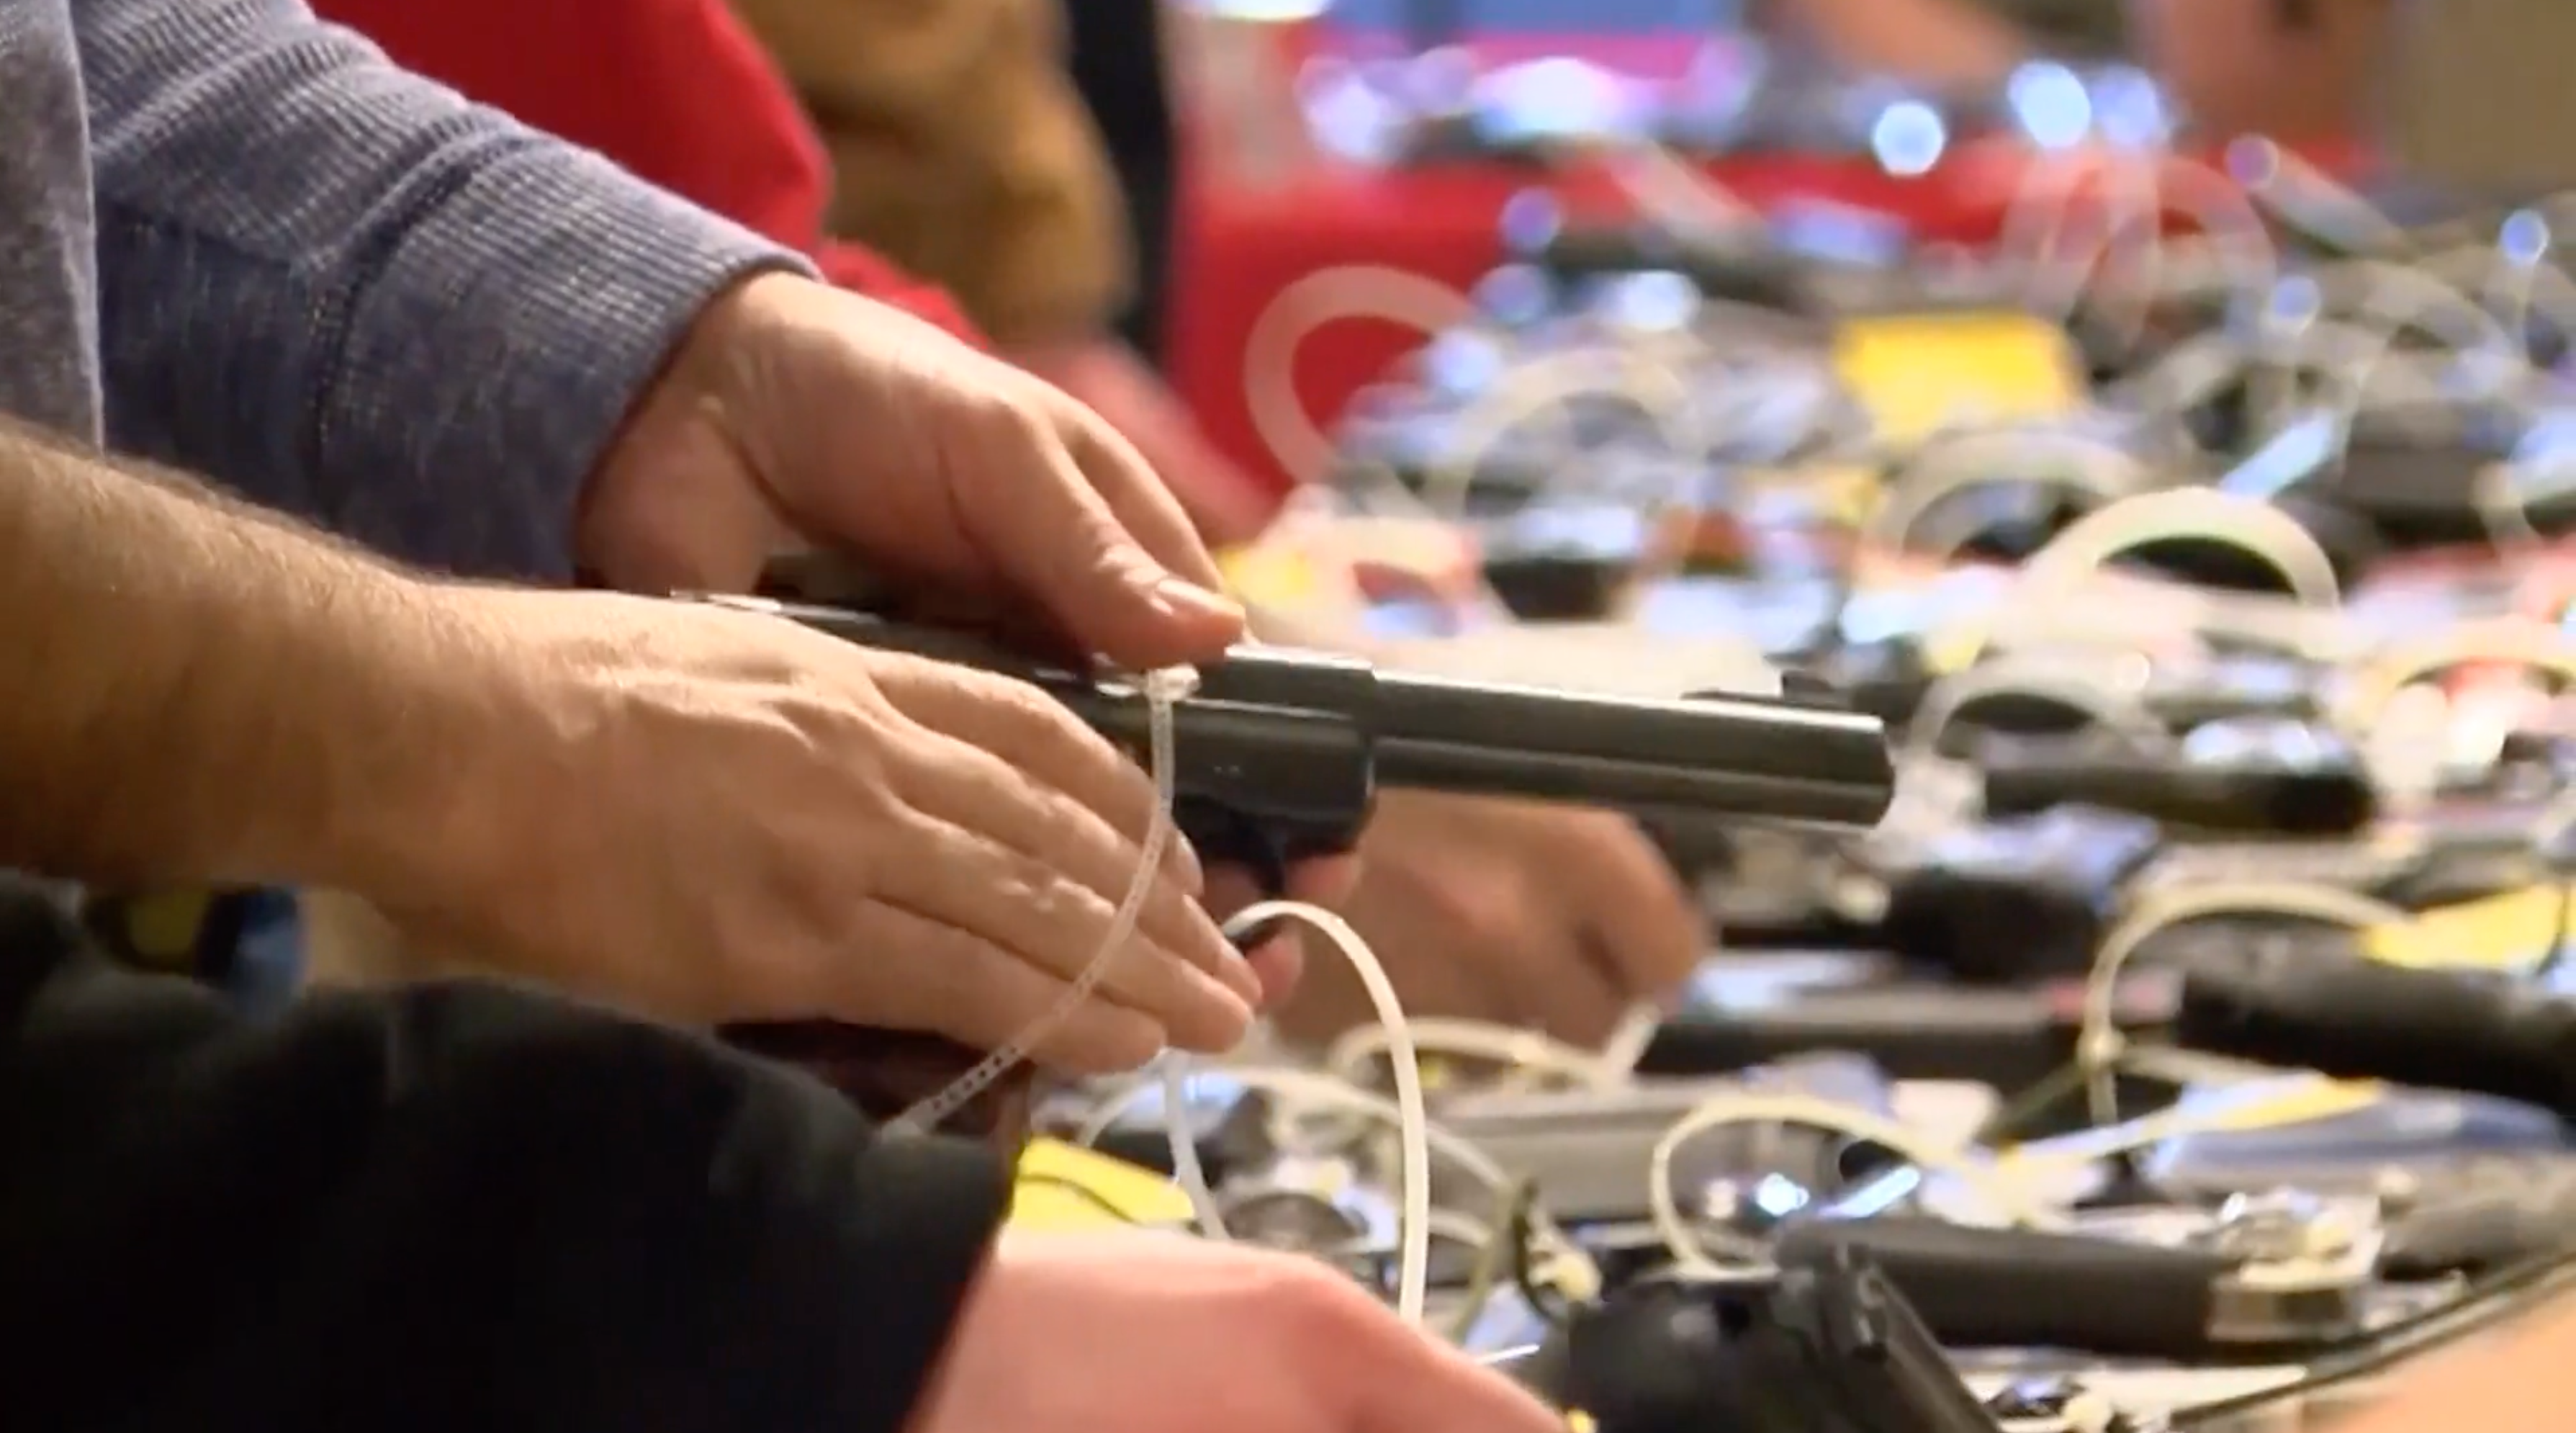 North Carolina’s no-permit concealed carry bill dropped before vote in NC House